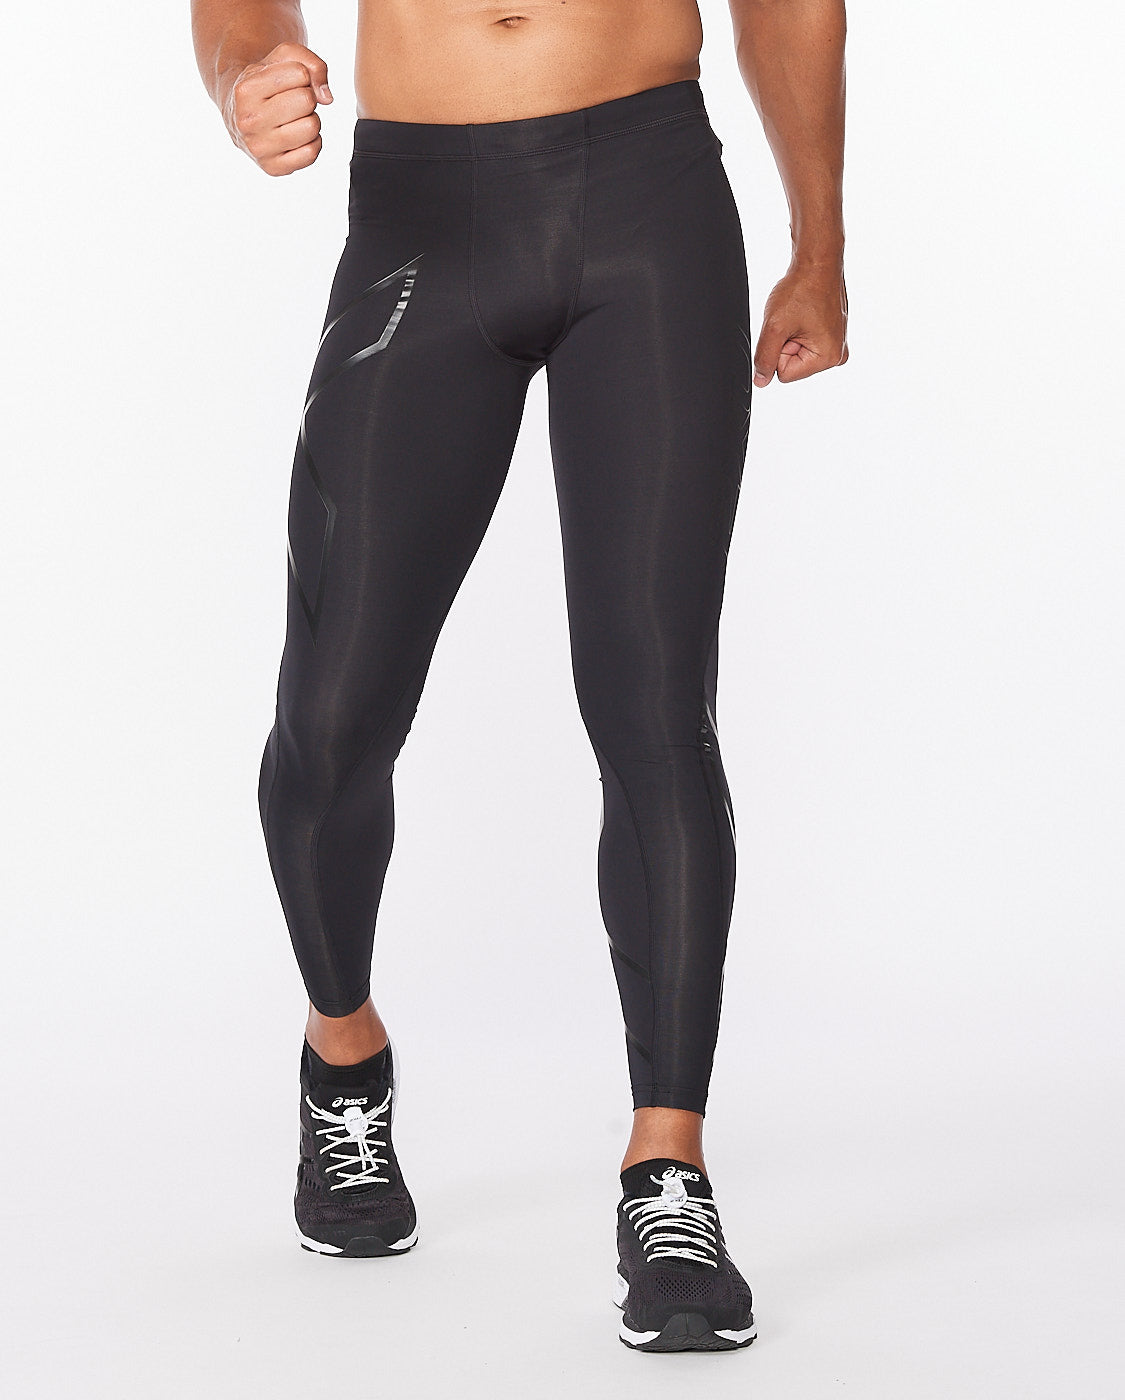 2XU Accel Compression Tights with Storage – MADOVERBIKING